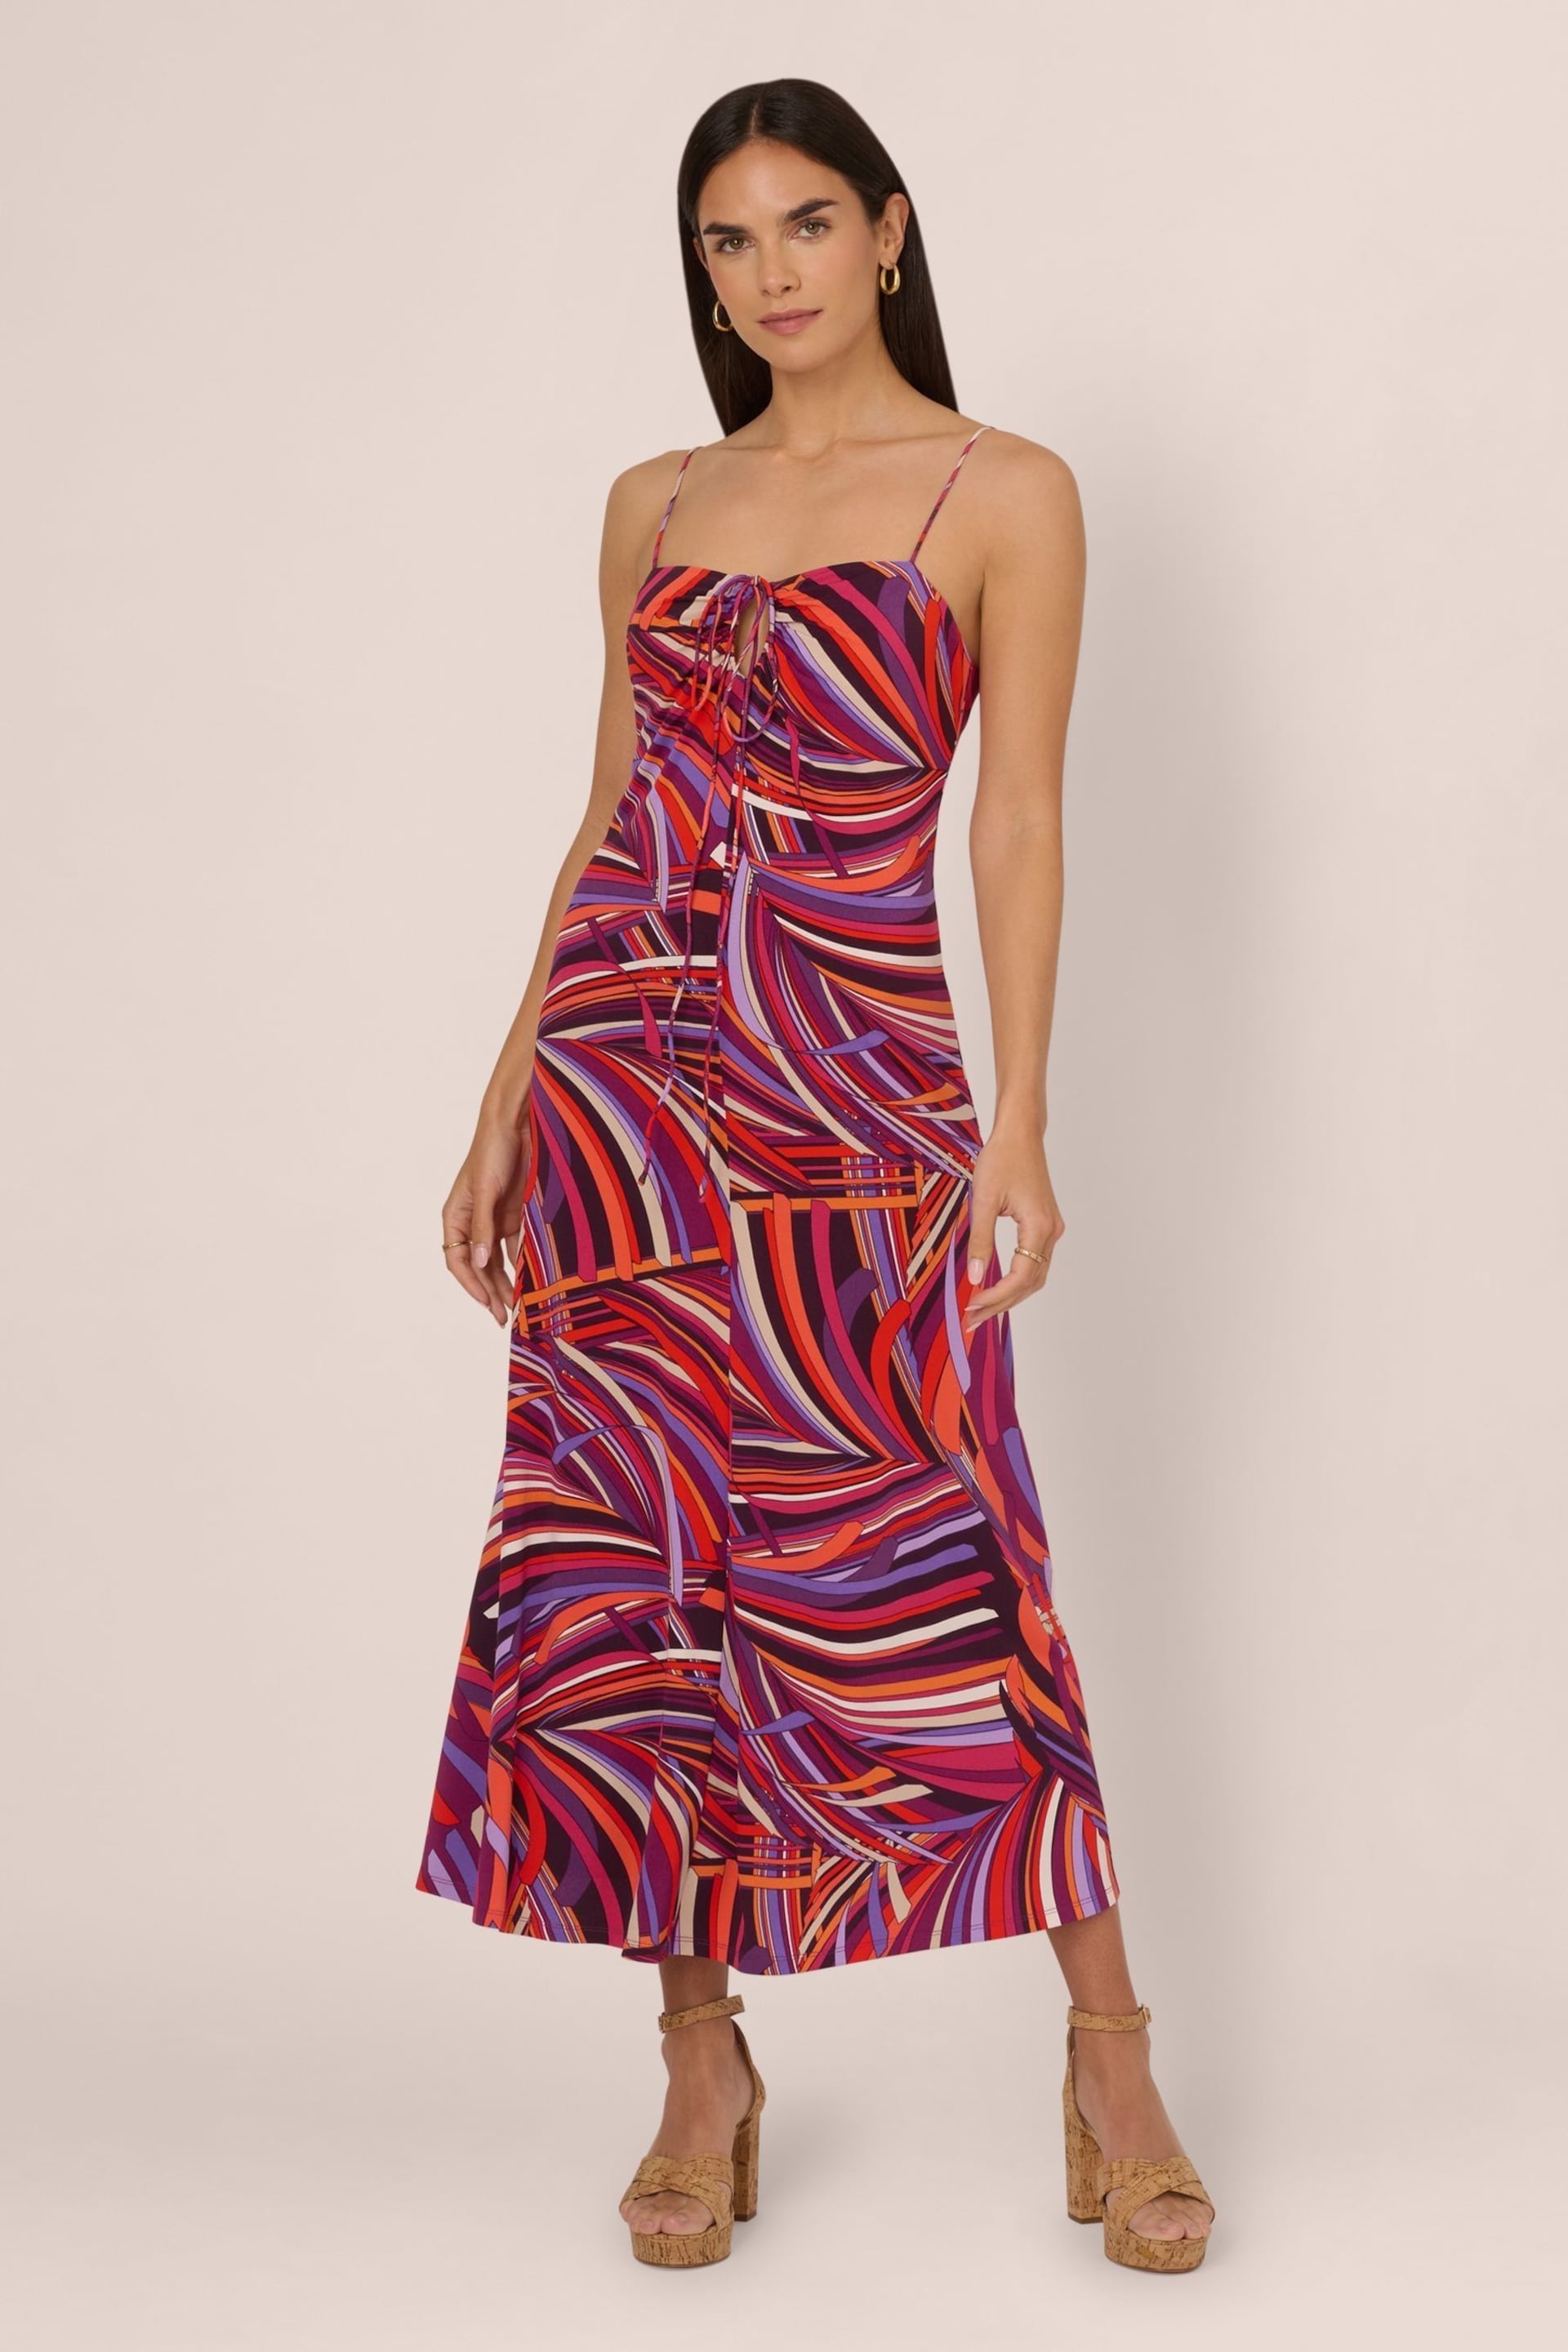 Adrianna Papell Purple Printed Jersey Dress - Image 1 of 7